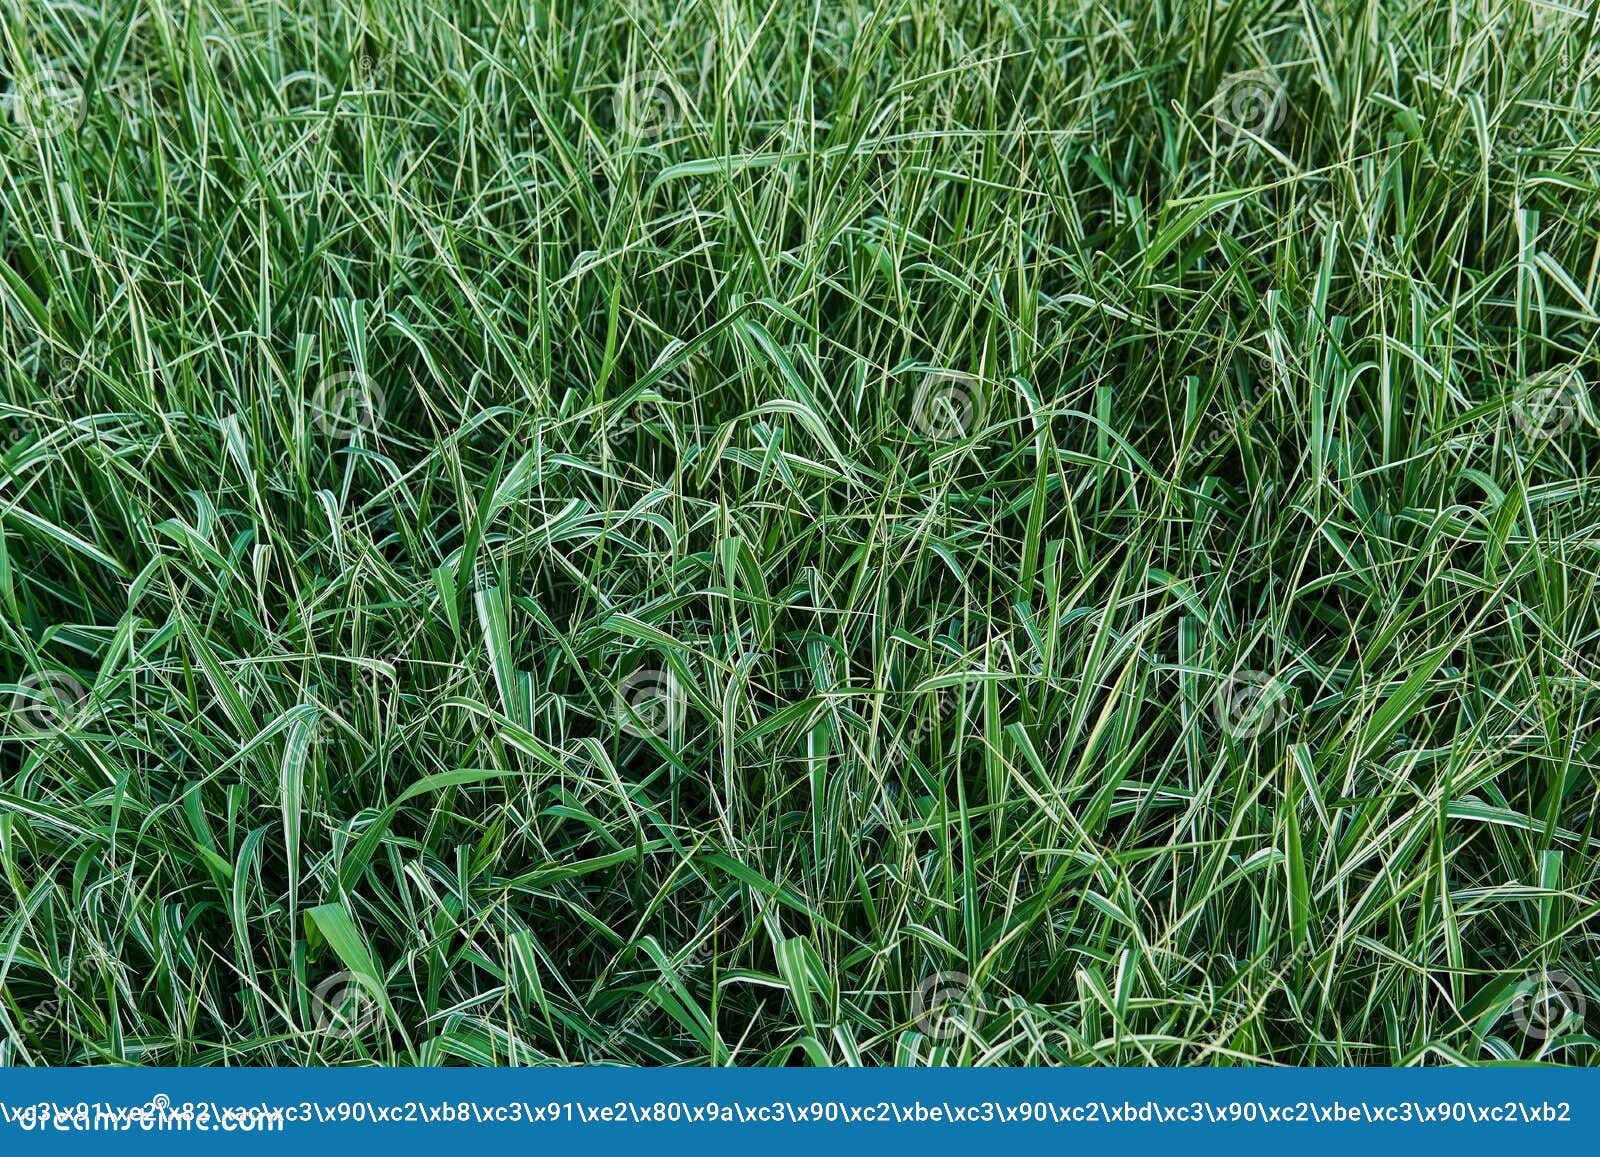 natural grass background - lawn of variegated phalaris with white stripes on leaves